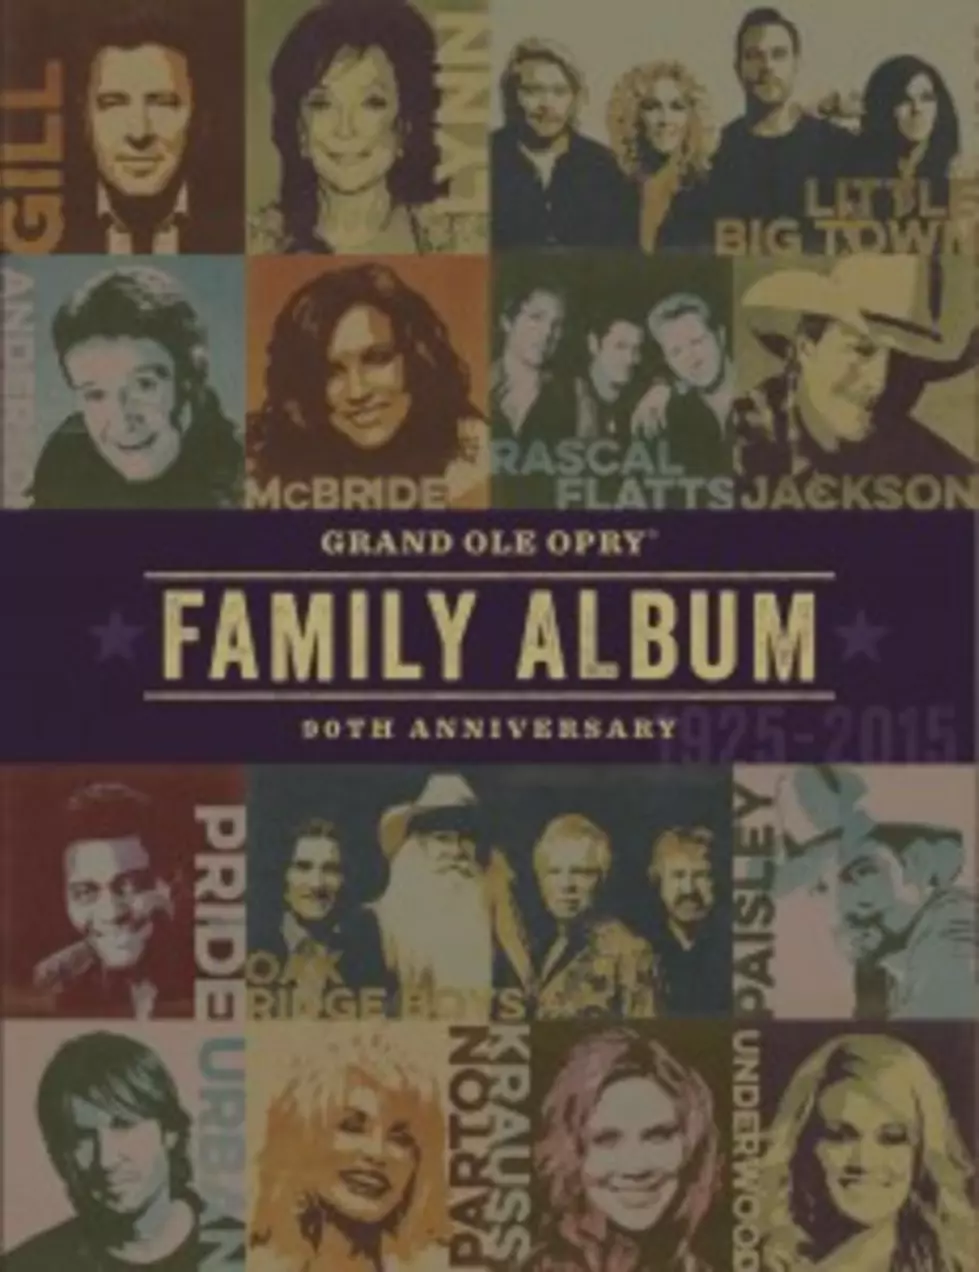 Grand Ole Opry Celebrates 90th Anniversary With ‘Family Album’